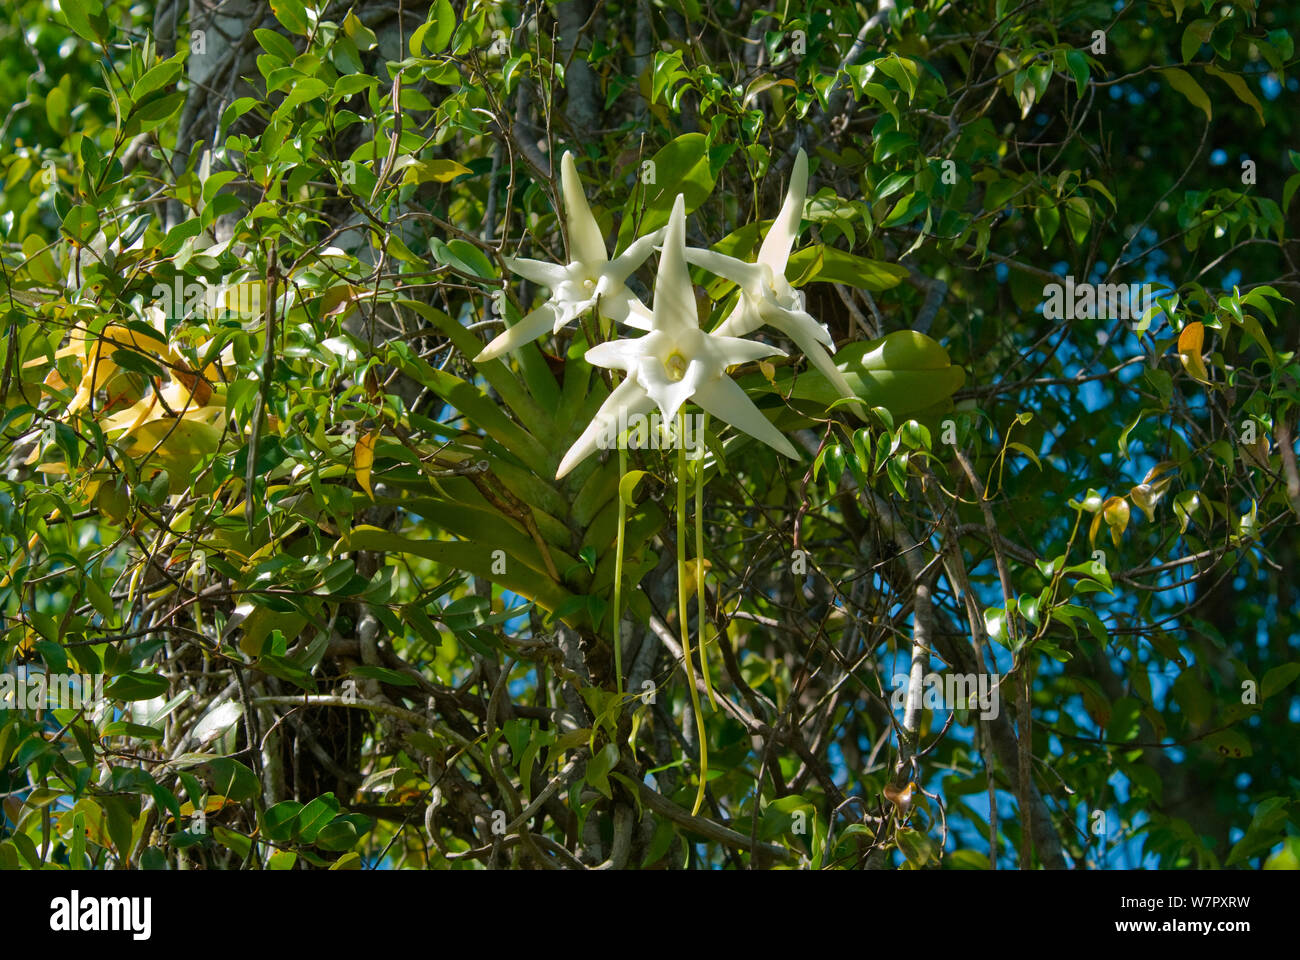 Darwin's Orchid (Angraecum sesquipedale)  species which is pollinated by a long-tongued moth, from Ambila, Madagascar. Photograph taken on location for BBC 'Wild Madagascar' Series, August 2009. Stock Photo